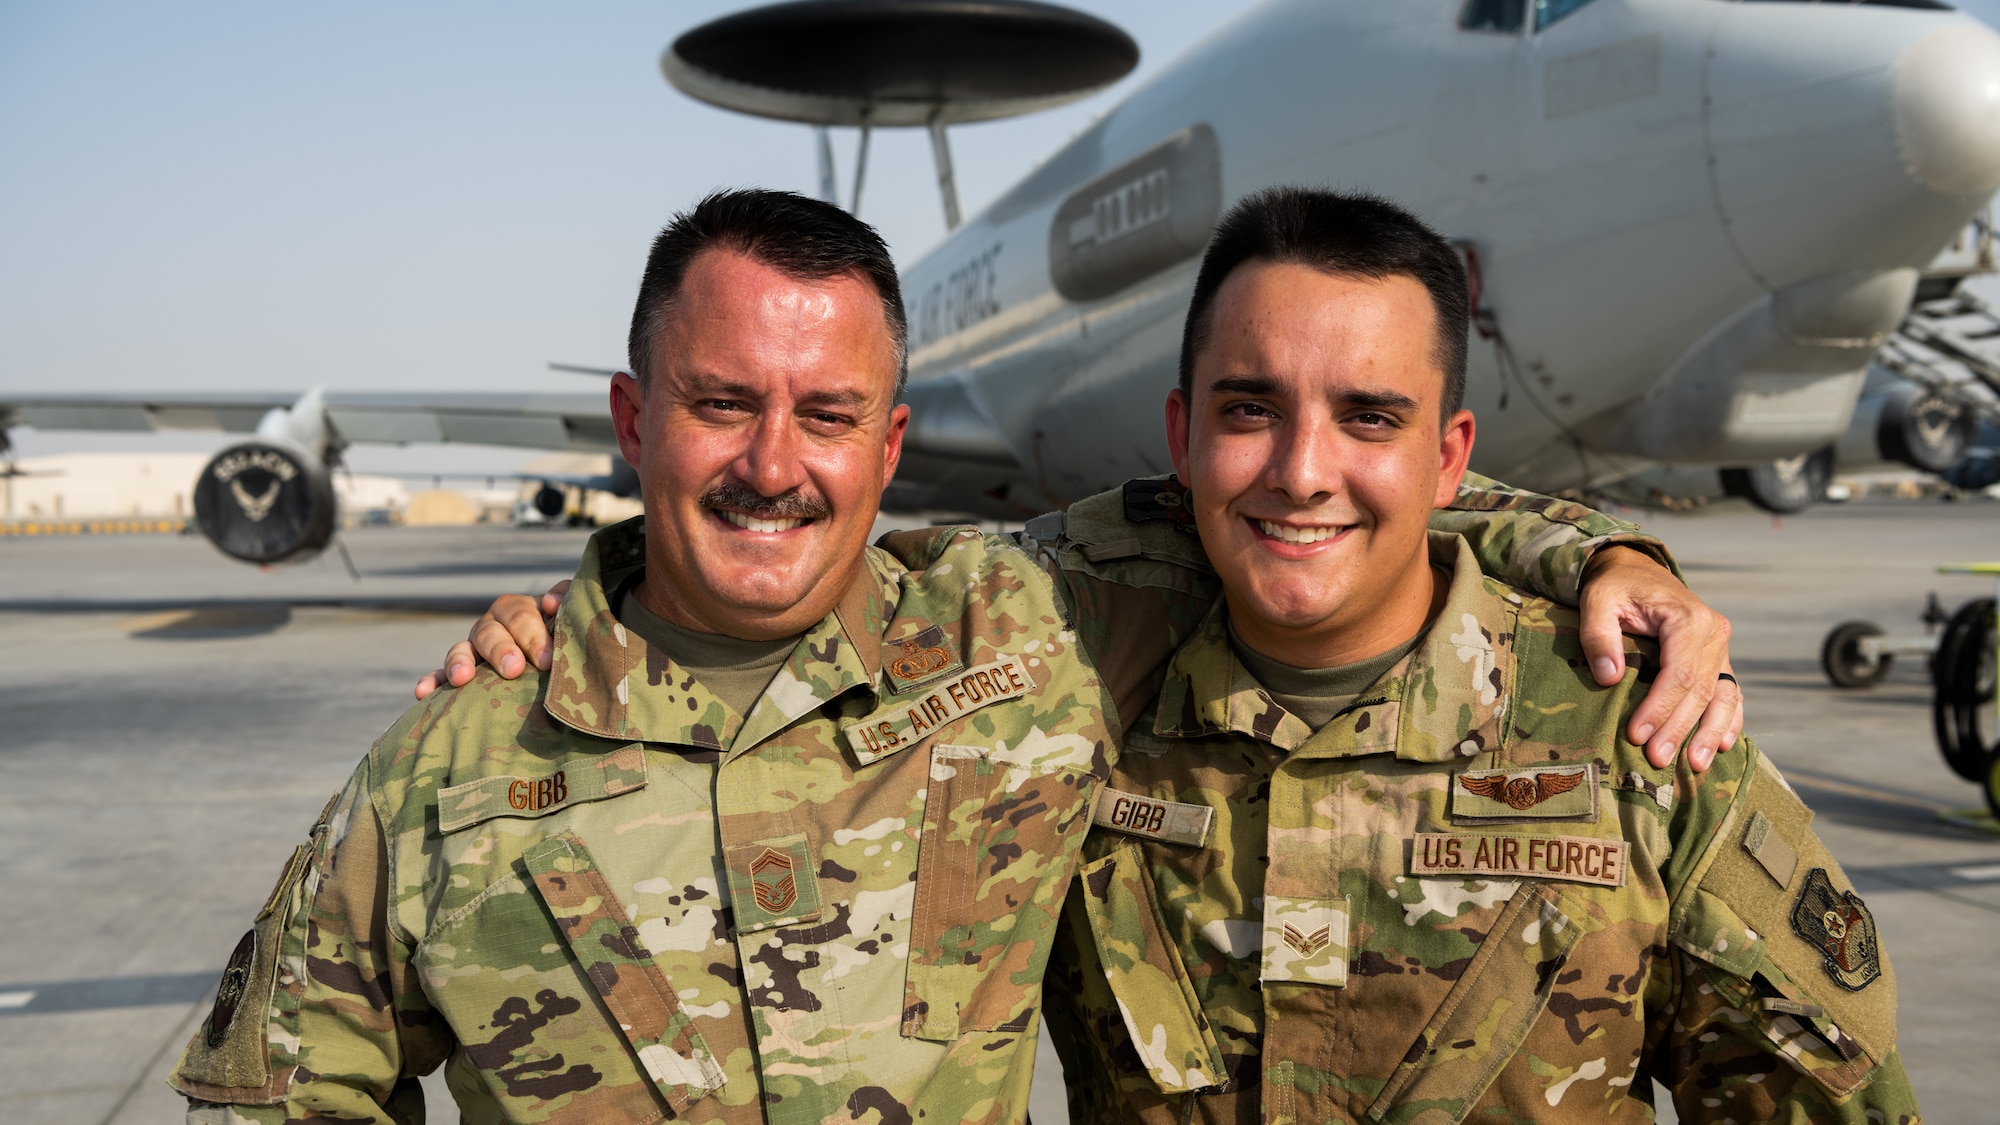 U.S. Air Force Senior Master Sgt. Daniel Gibb, 968th Expeditionary Airborne Air Control Squadron (EAACS) aviation resource manager, and his son Senior Airman Derek Gibb, 968th EAACS computer display maintenance technician, pose for a photo in front of their unit’s E-3 Sentry aircraft at Al Dhafra Air Base, United Arab Emirates, May 26, 2021. Both father and son are first time deployers.